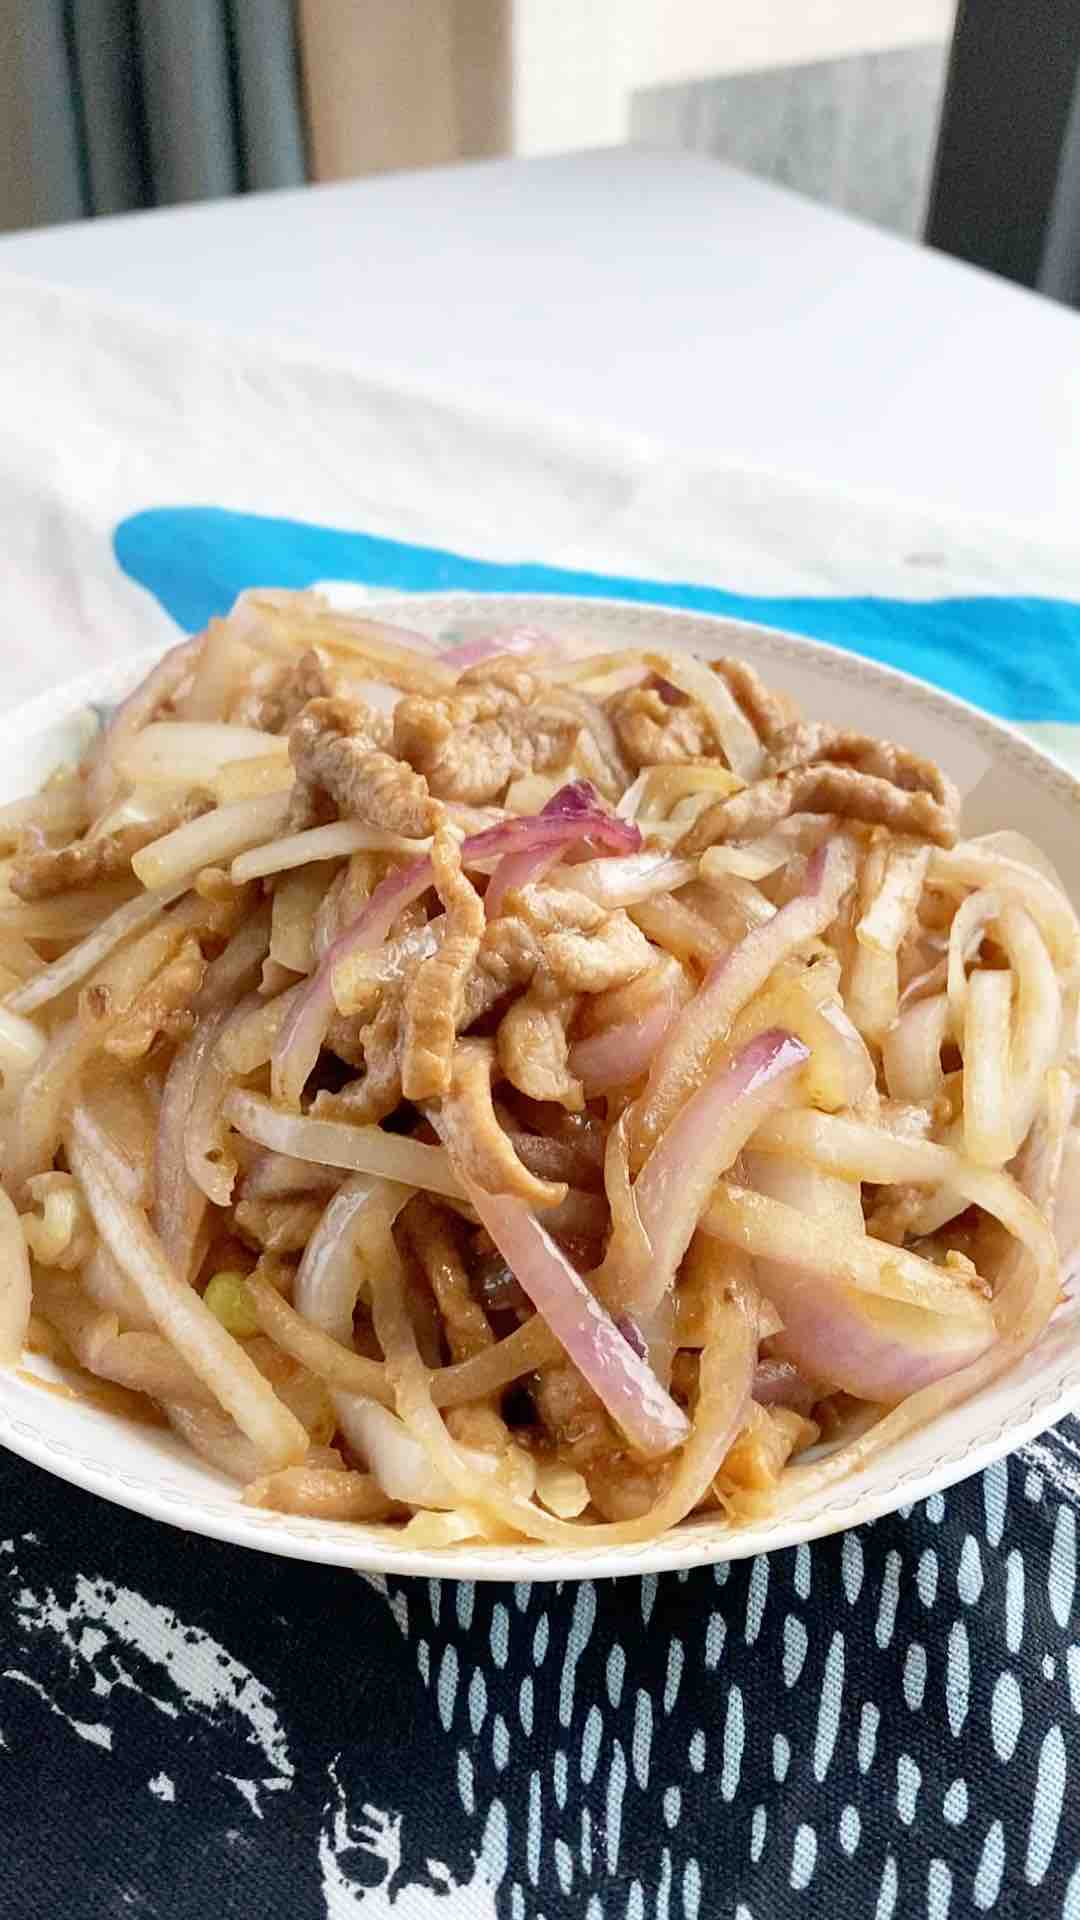 Stir-fried Shredded Pork with Onion, Onion is A Treasure, Eat More After The Festival to Cleanse The Intestines recipe